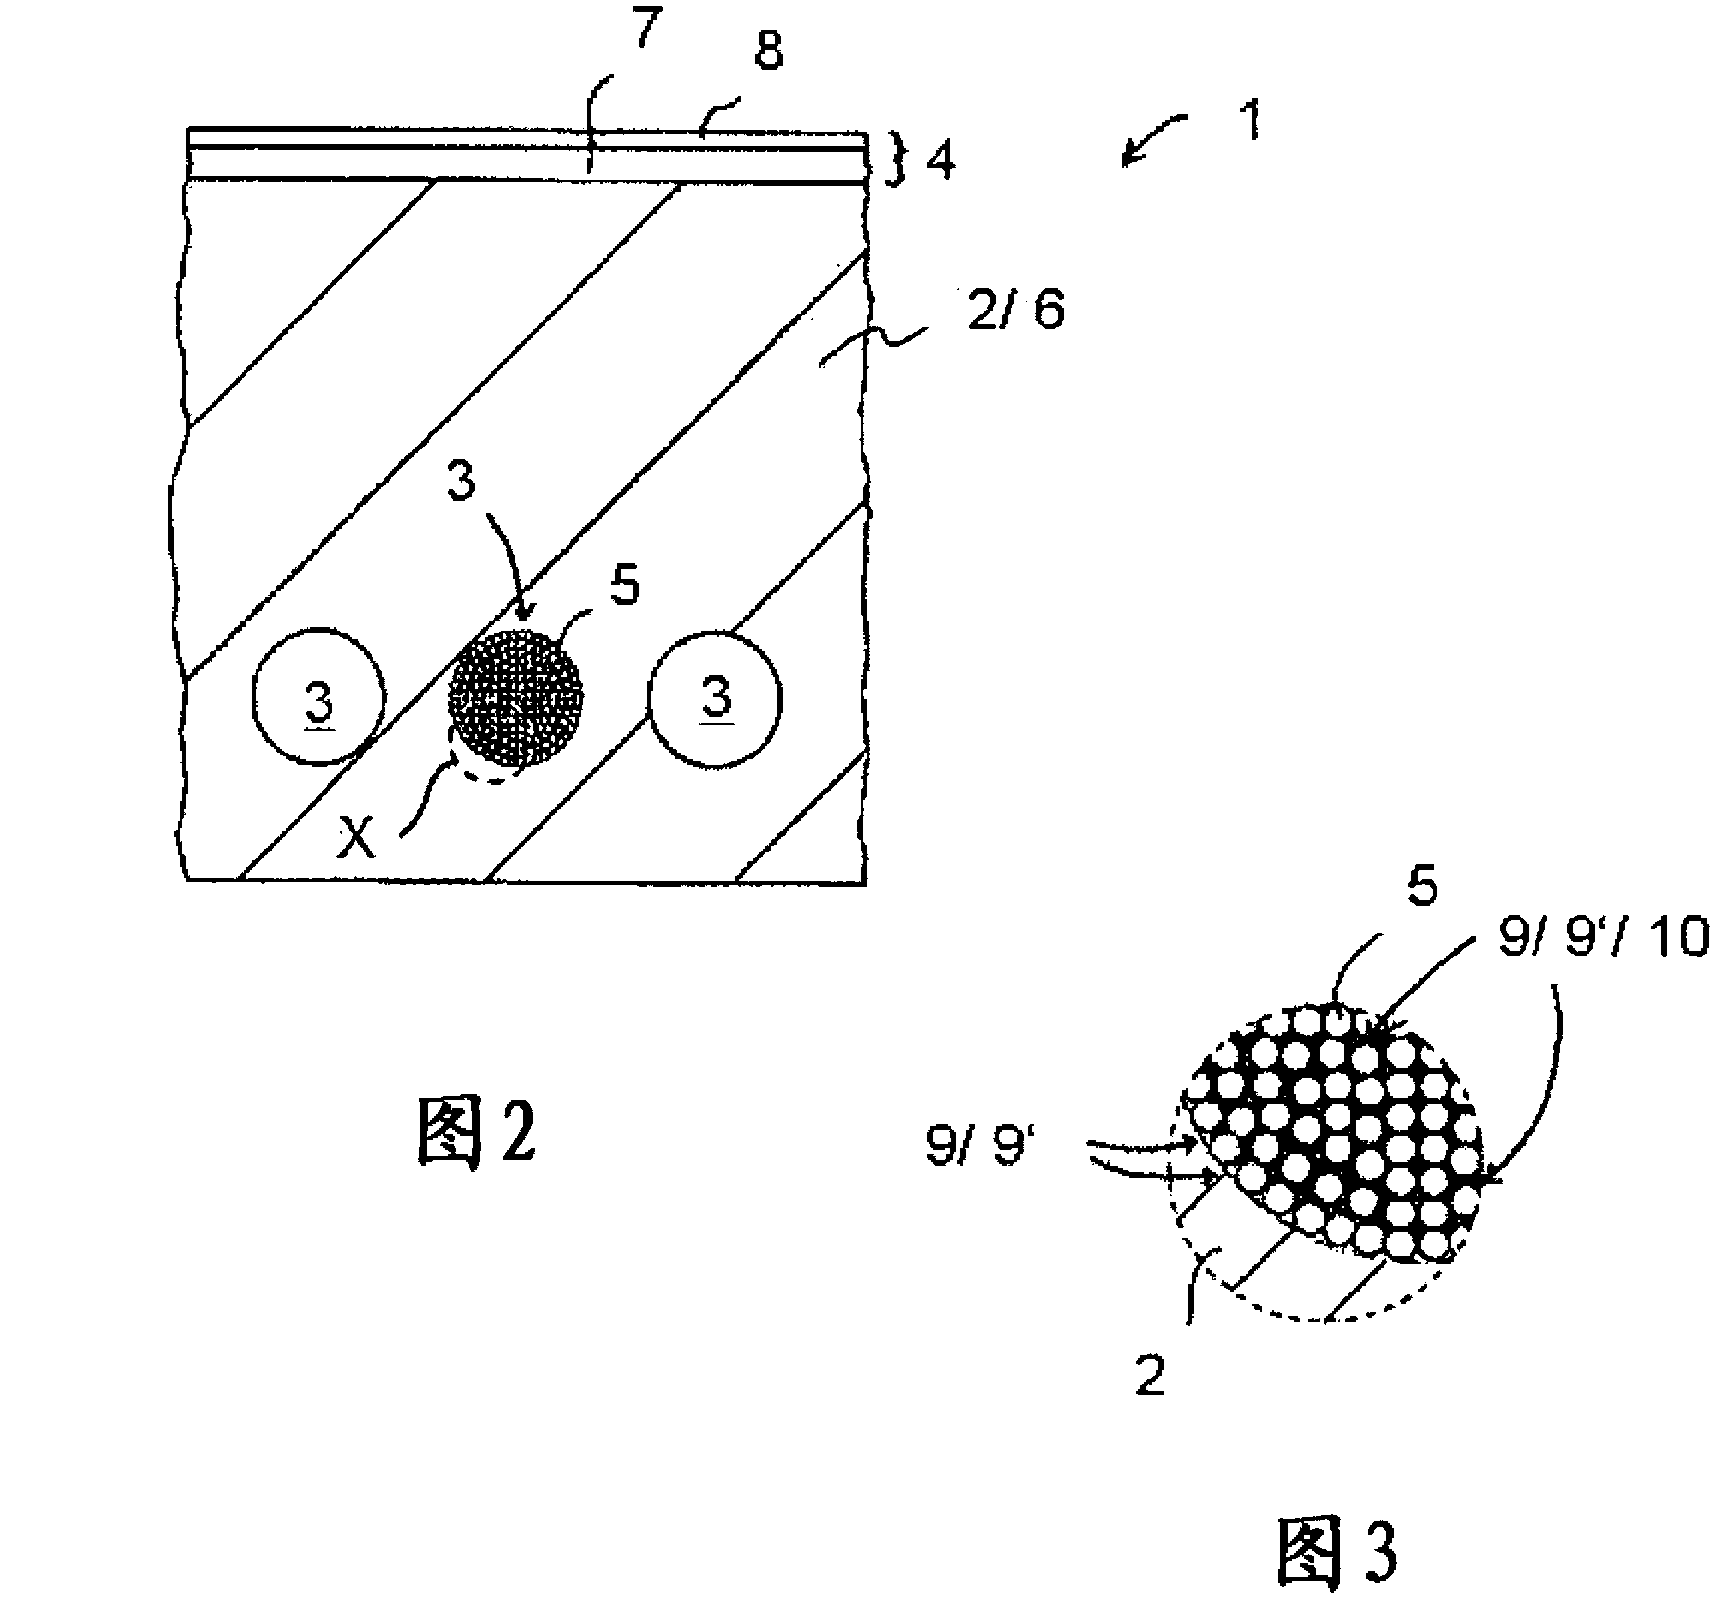 Drive belt for transmitting drive movement, and method for producing drive belt